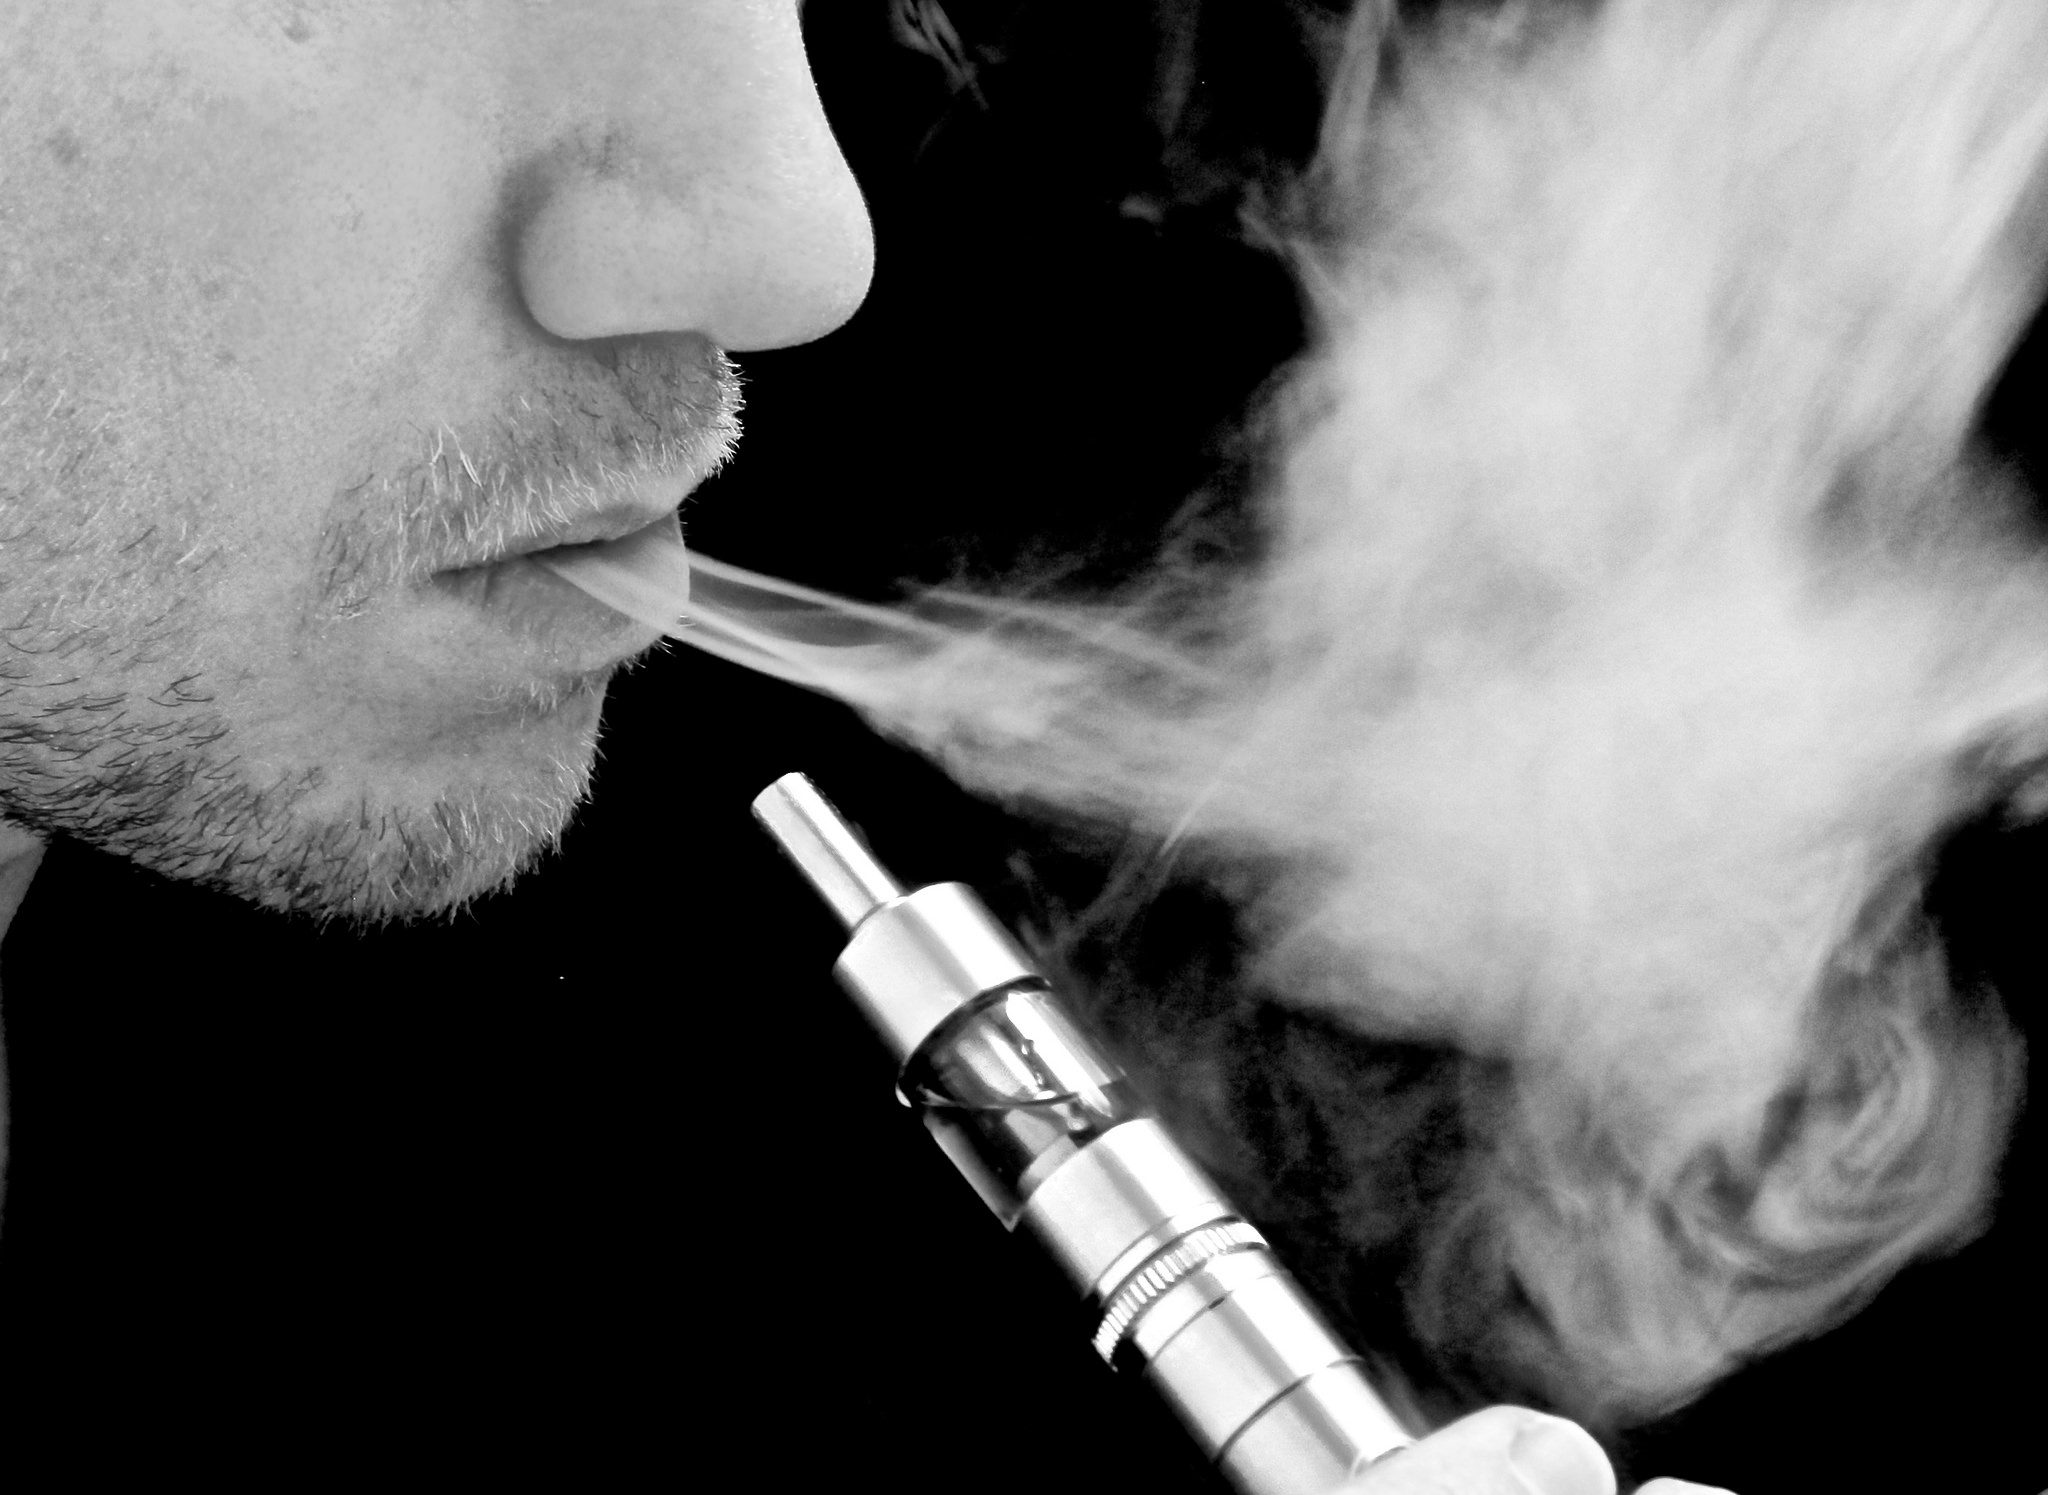 Learn how vaping helps smokers quit ... photo by CC user ecigclick on Flickr